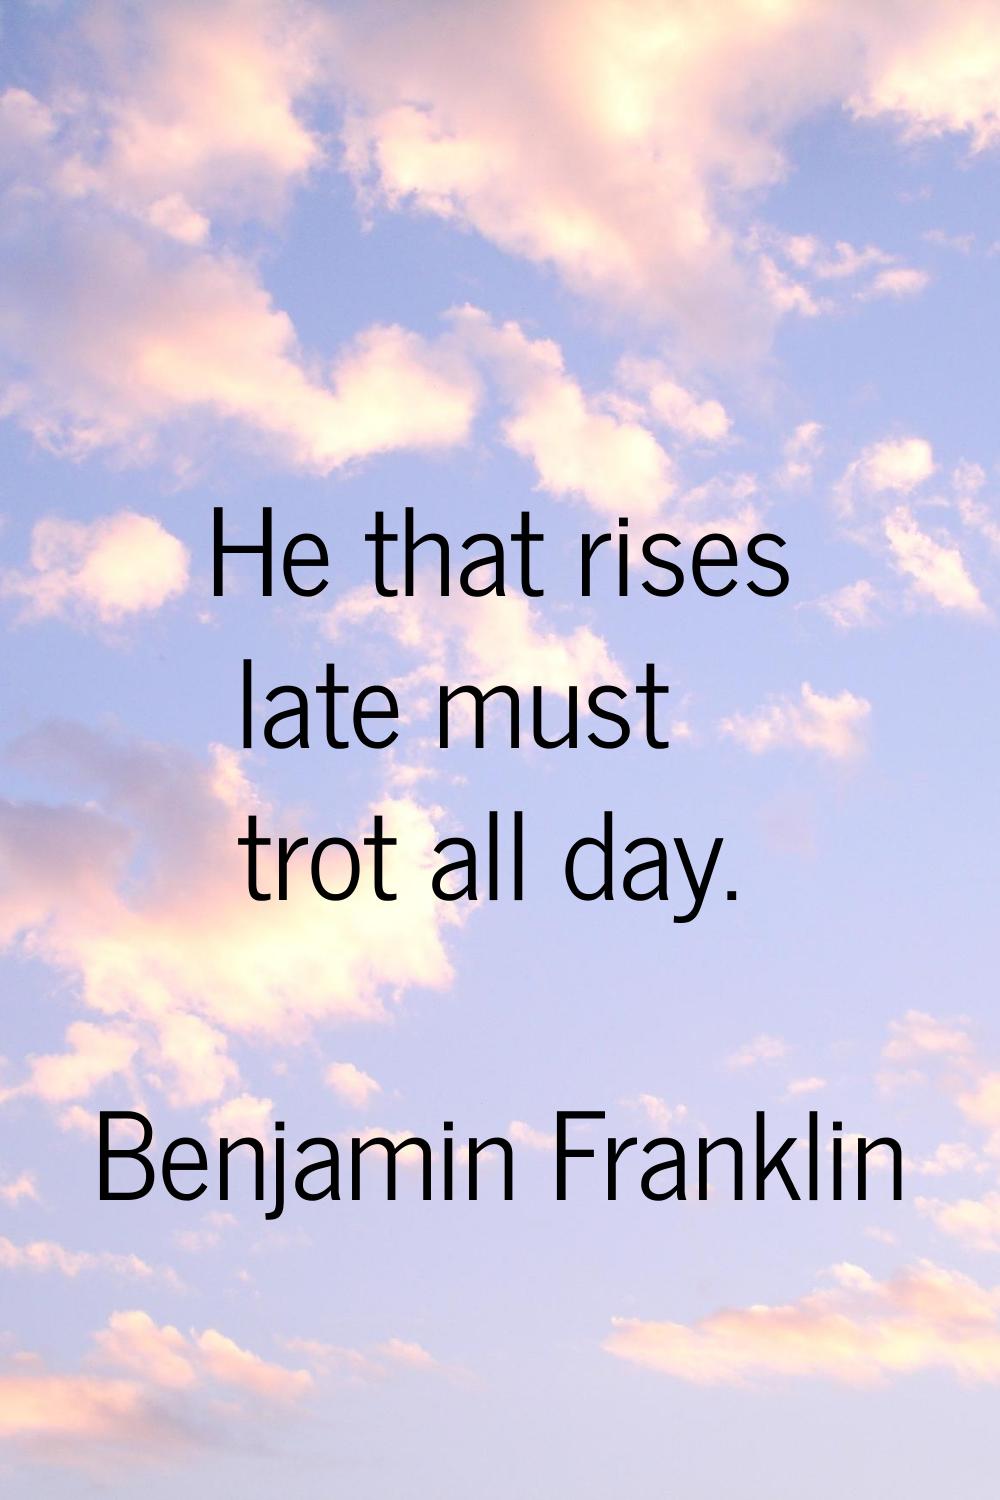 He that rises late must trot all day.